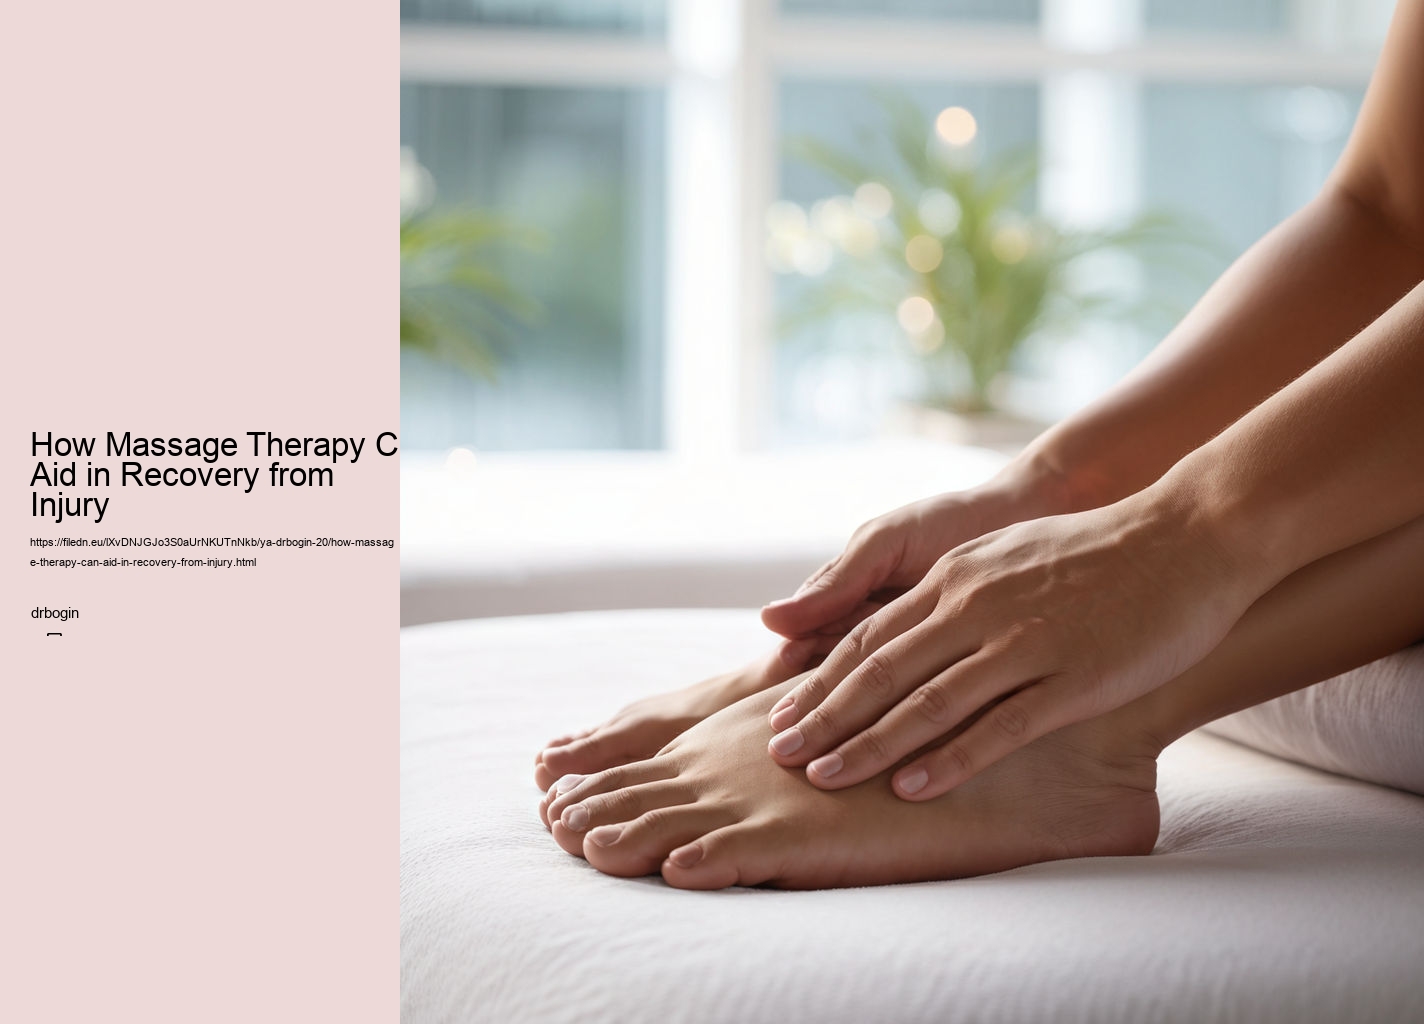 How Massage Therapy Can Aid in Recovery from Injury